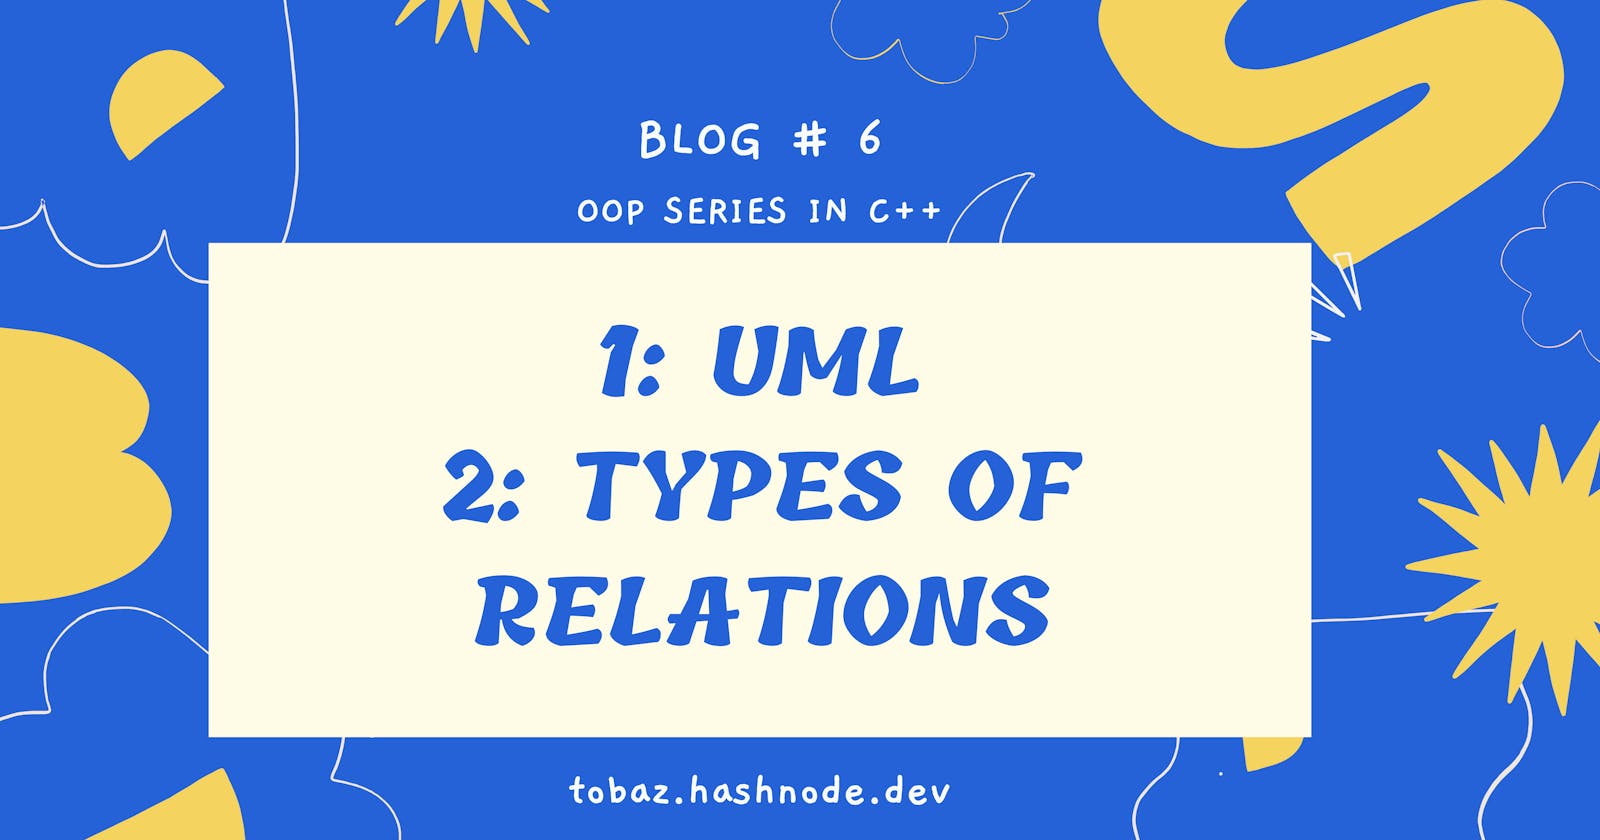 What Is UML And Types Of Relations In OOP?